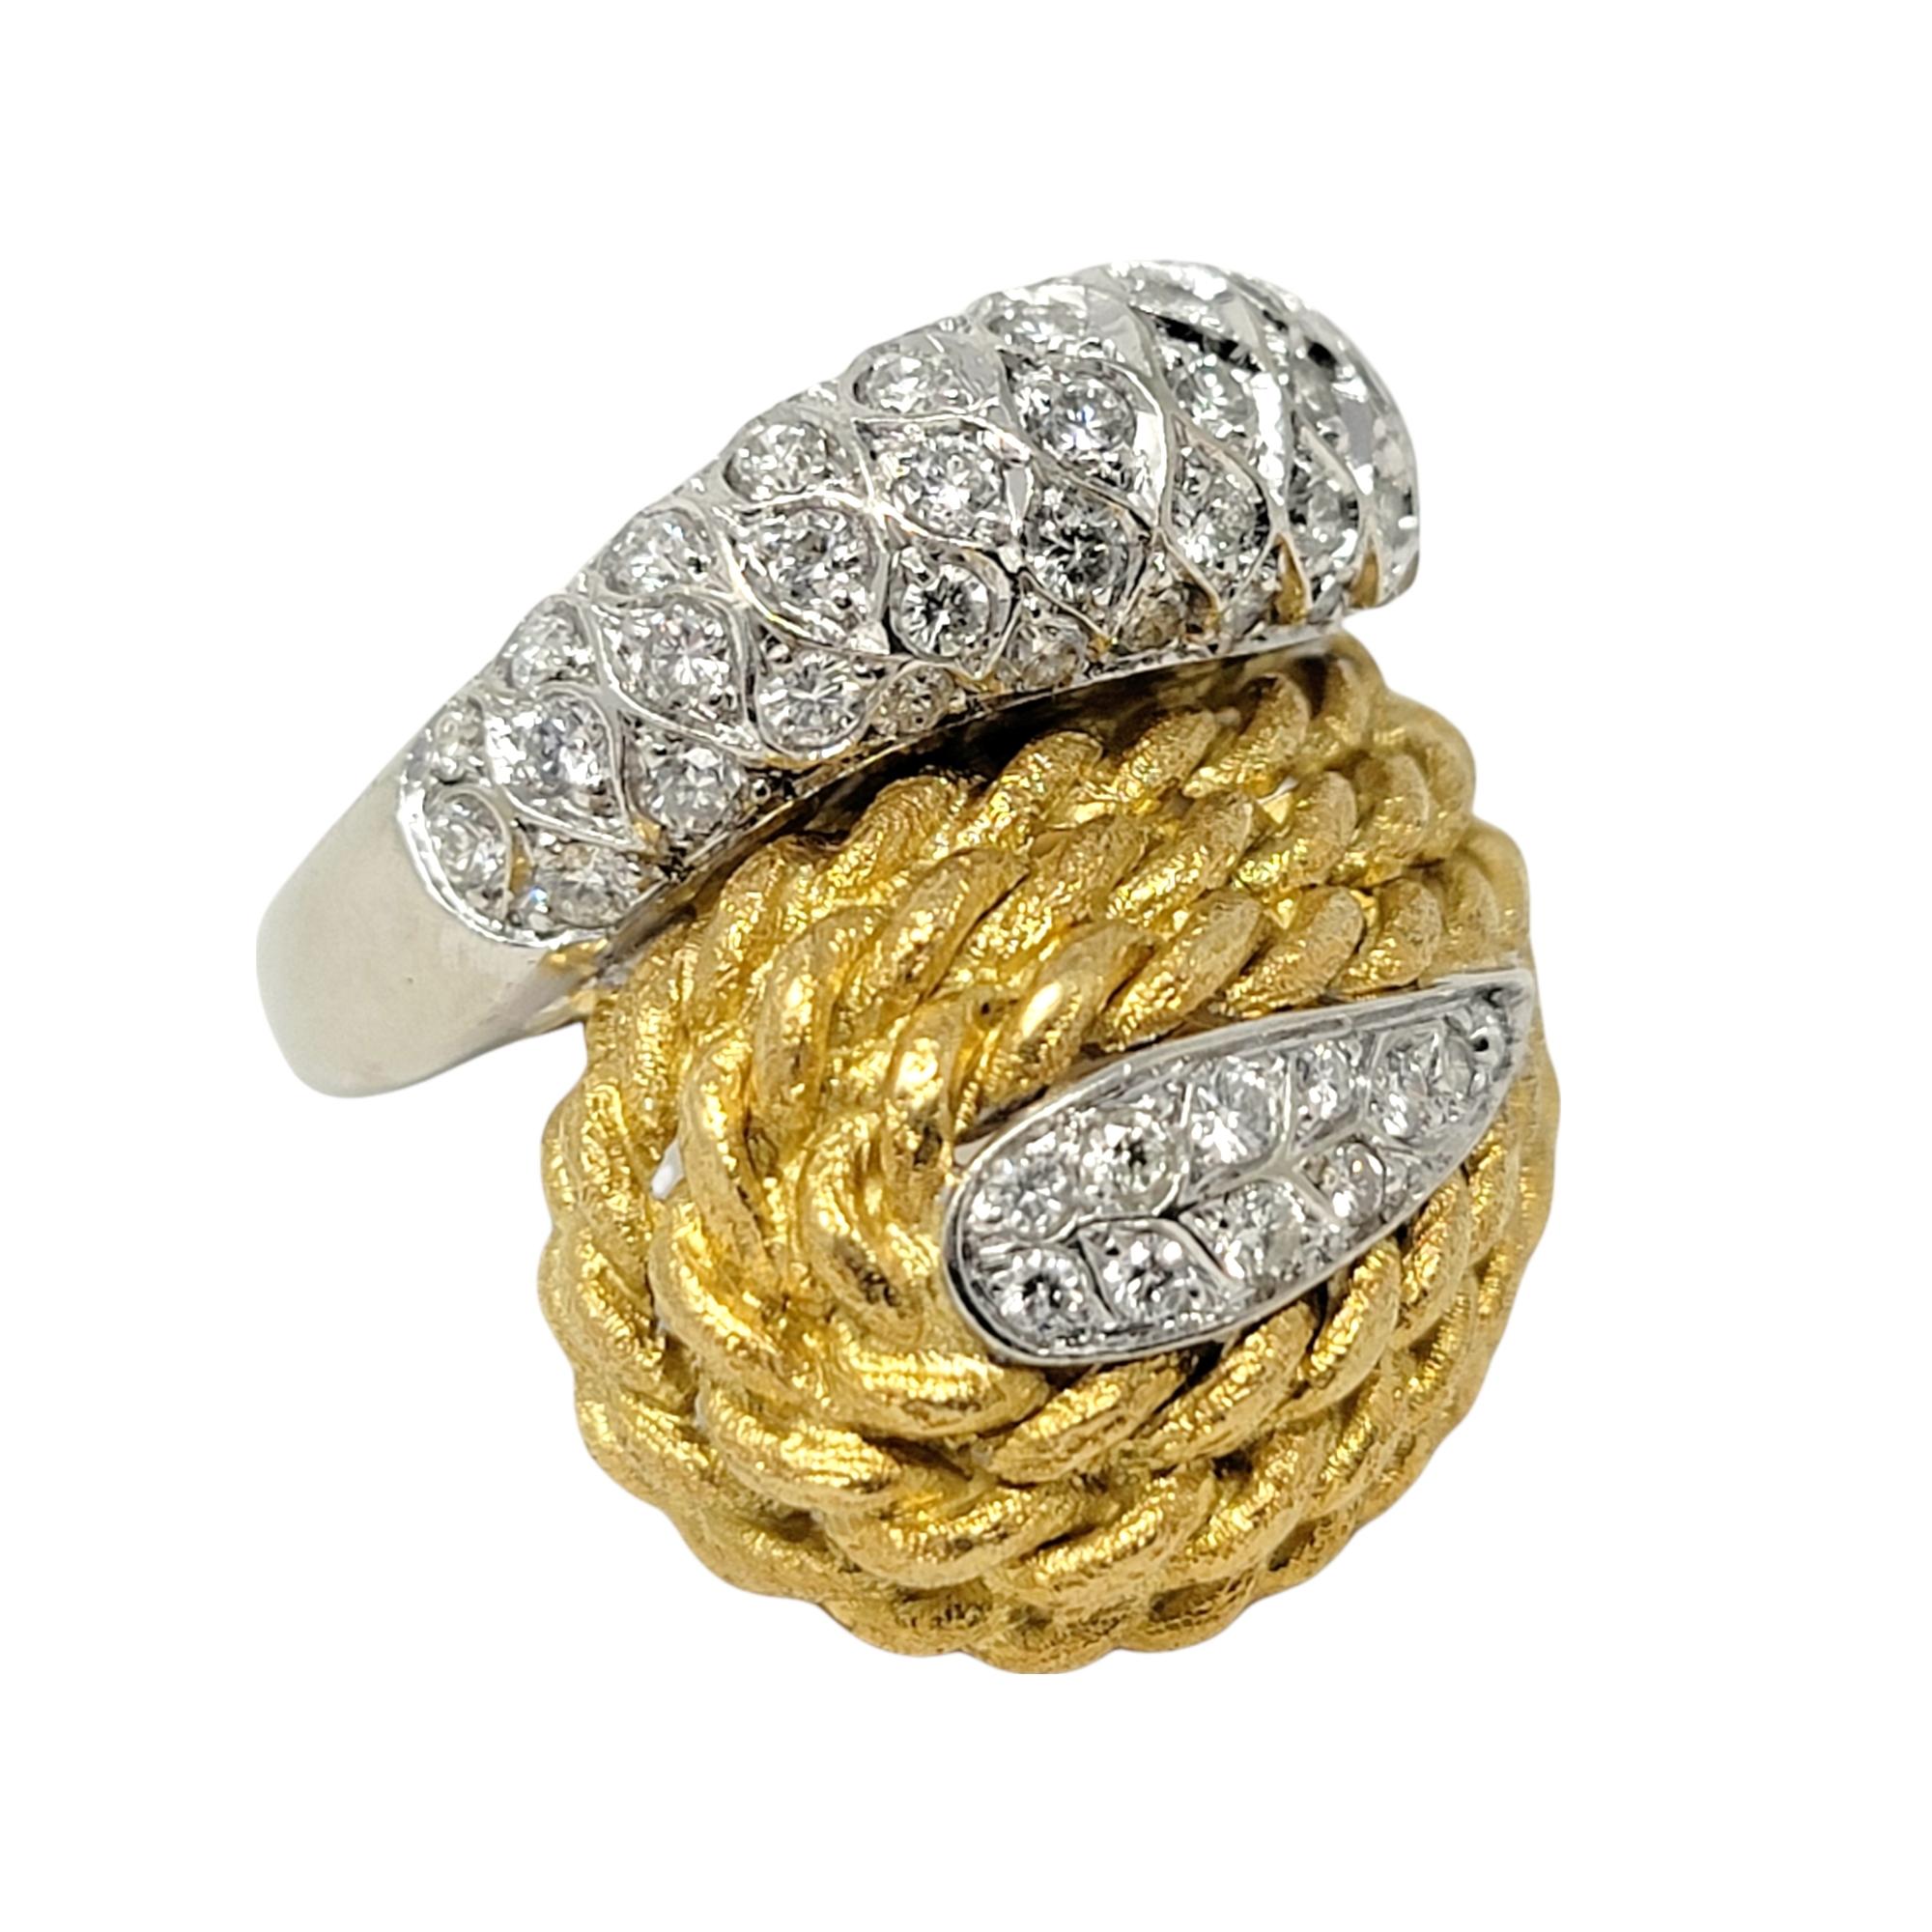 Ring size: 5.25

Stunning contemporary wrap style ring in two-tone gold with glittering diamond detail. 

Ring size: 5.25
Weight: 15 grams
Diamonds: 1.00 ctw
Diamond cut: Round Brilliant
Diamond color: F-G
Diamond clarity: VS1-VS2
Dome length: 23